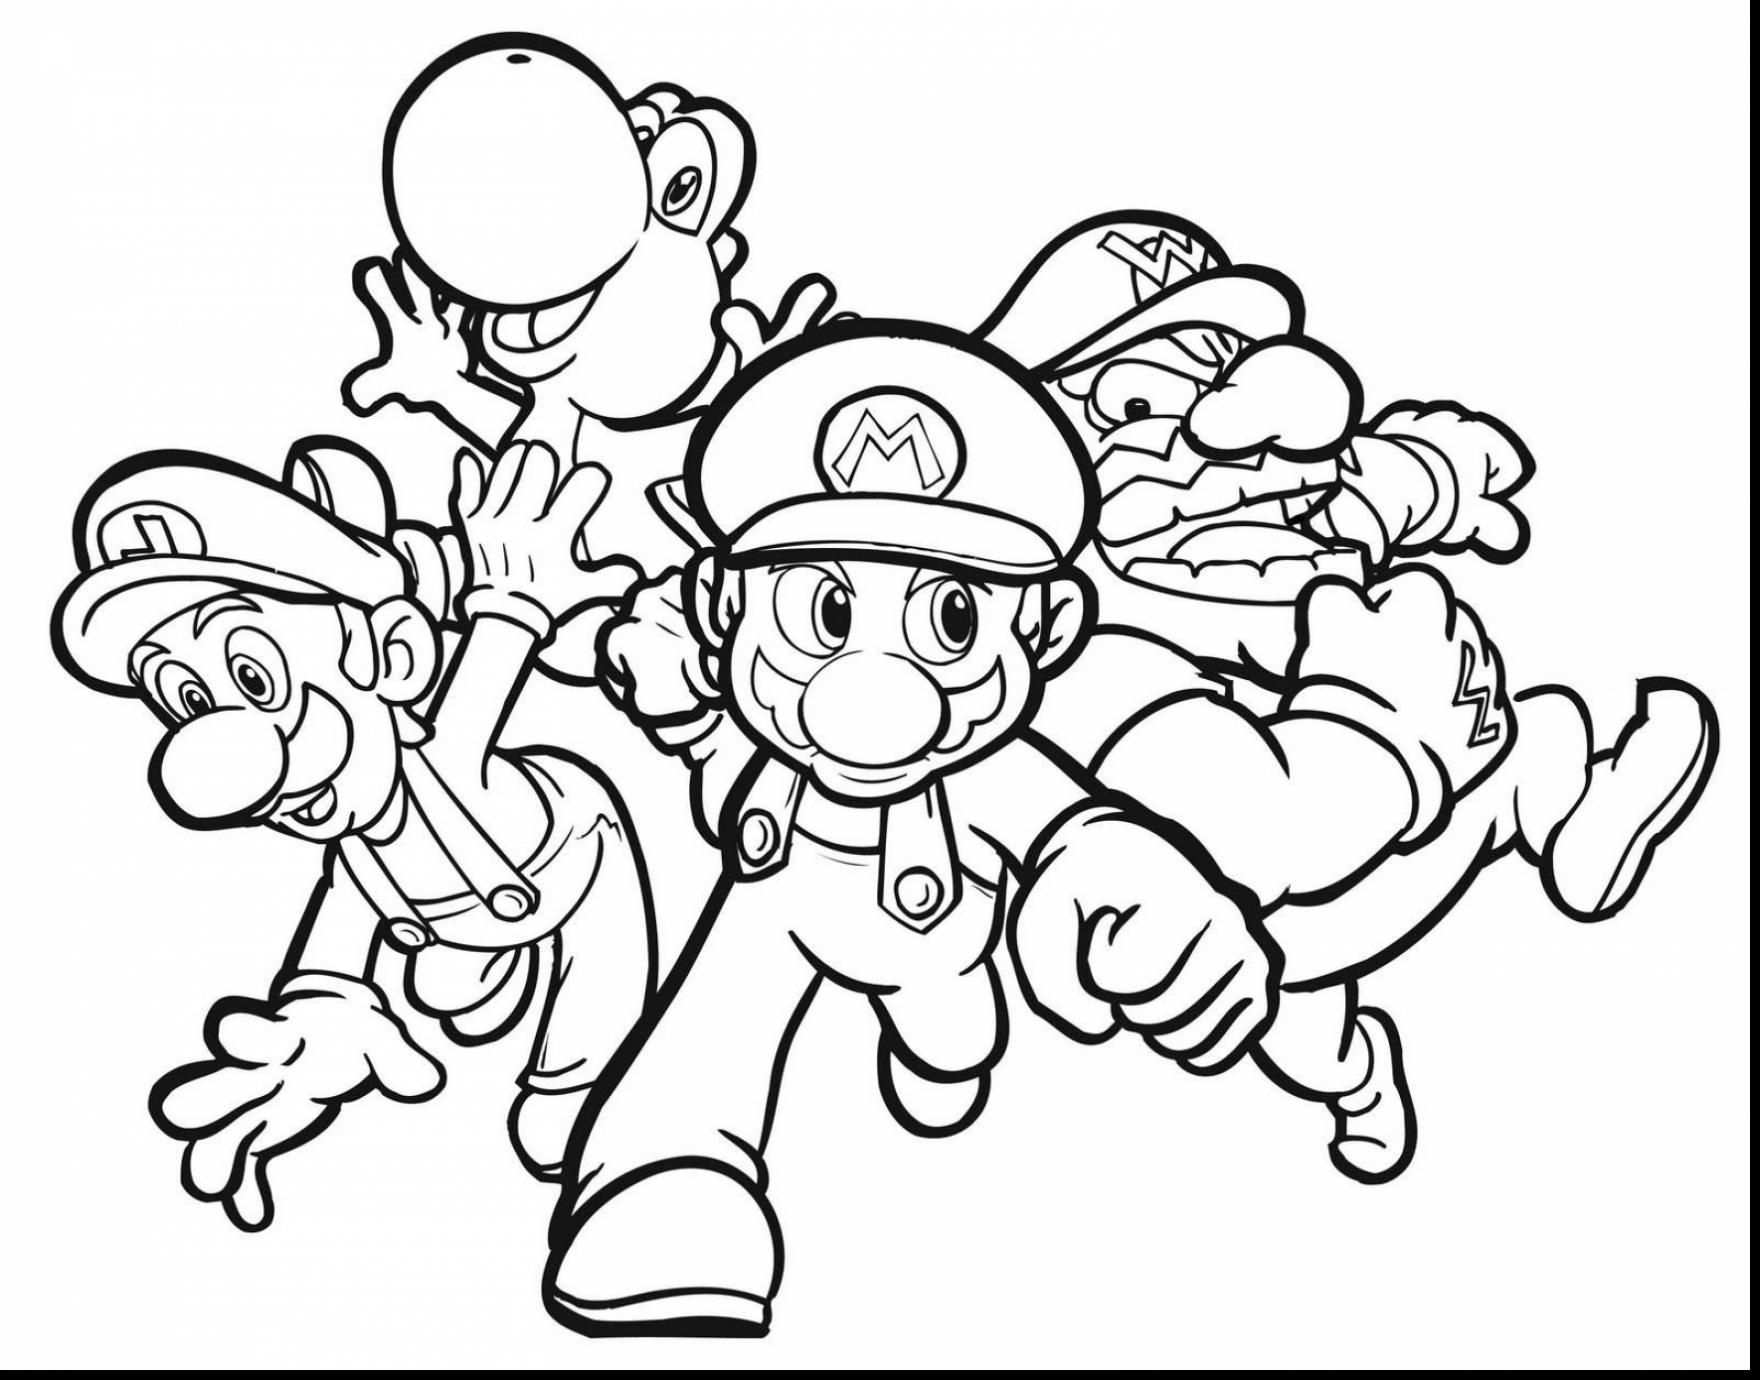 Super Mario Odyssey Coloring Pages Coloring Pages